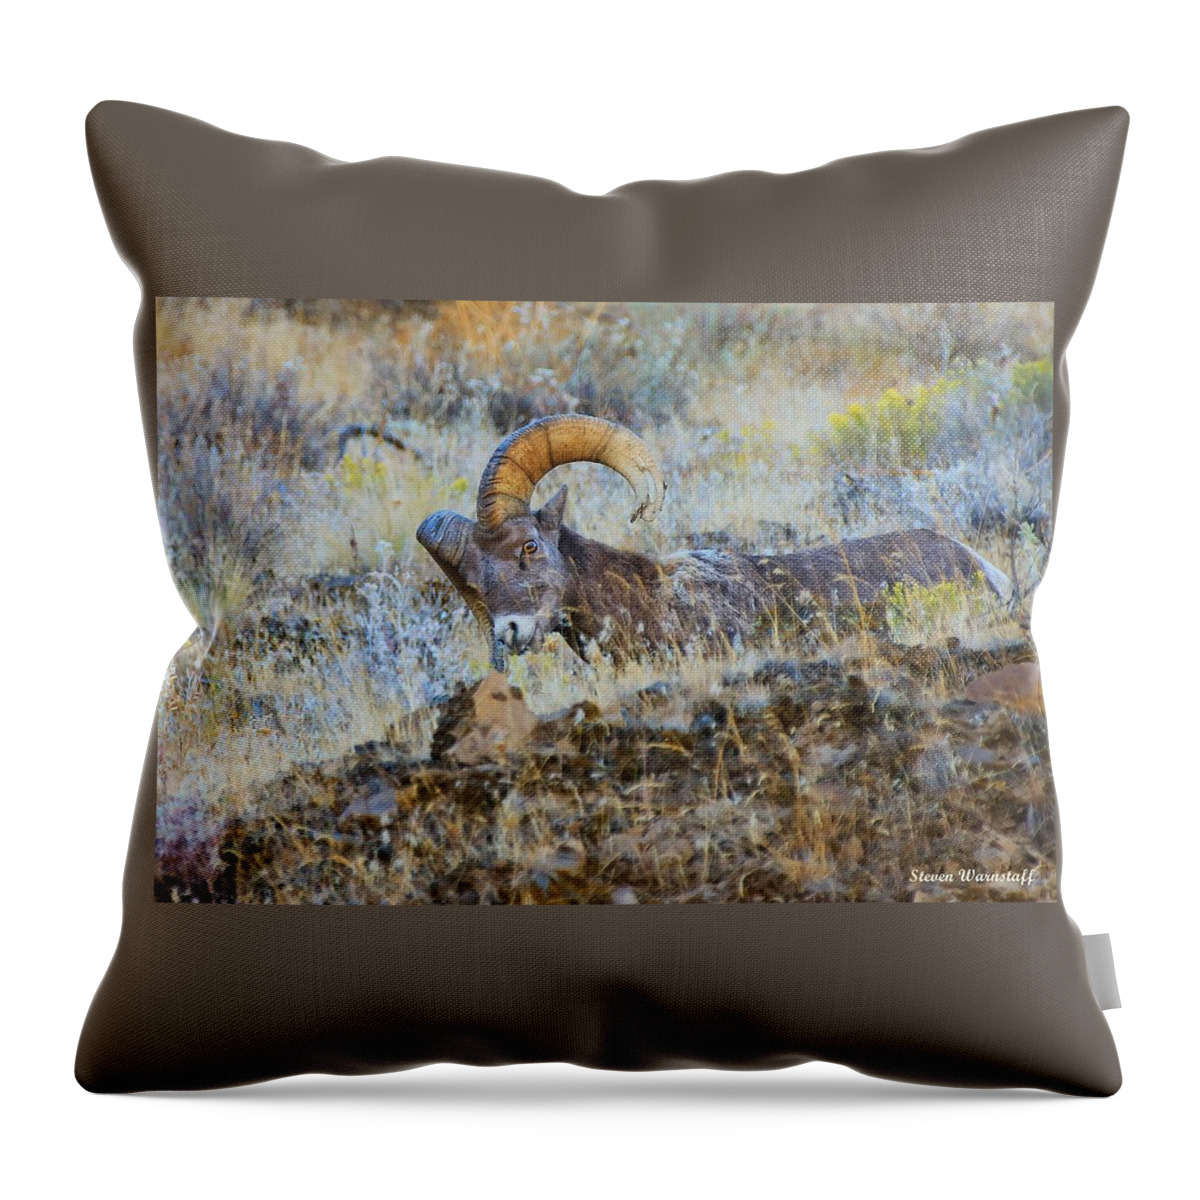 Oregon Throw Pillow featuring the photograph I'm Com'n For You by Steve Warnstaff